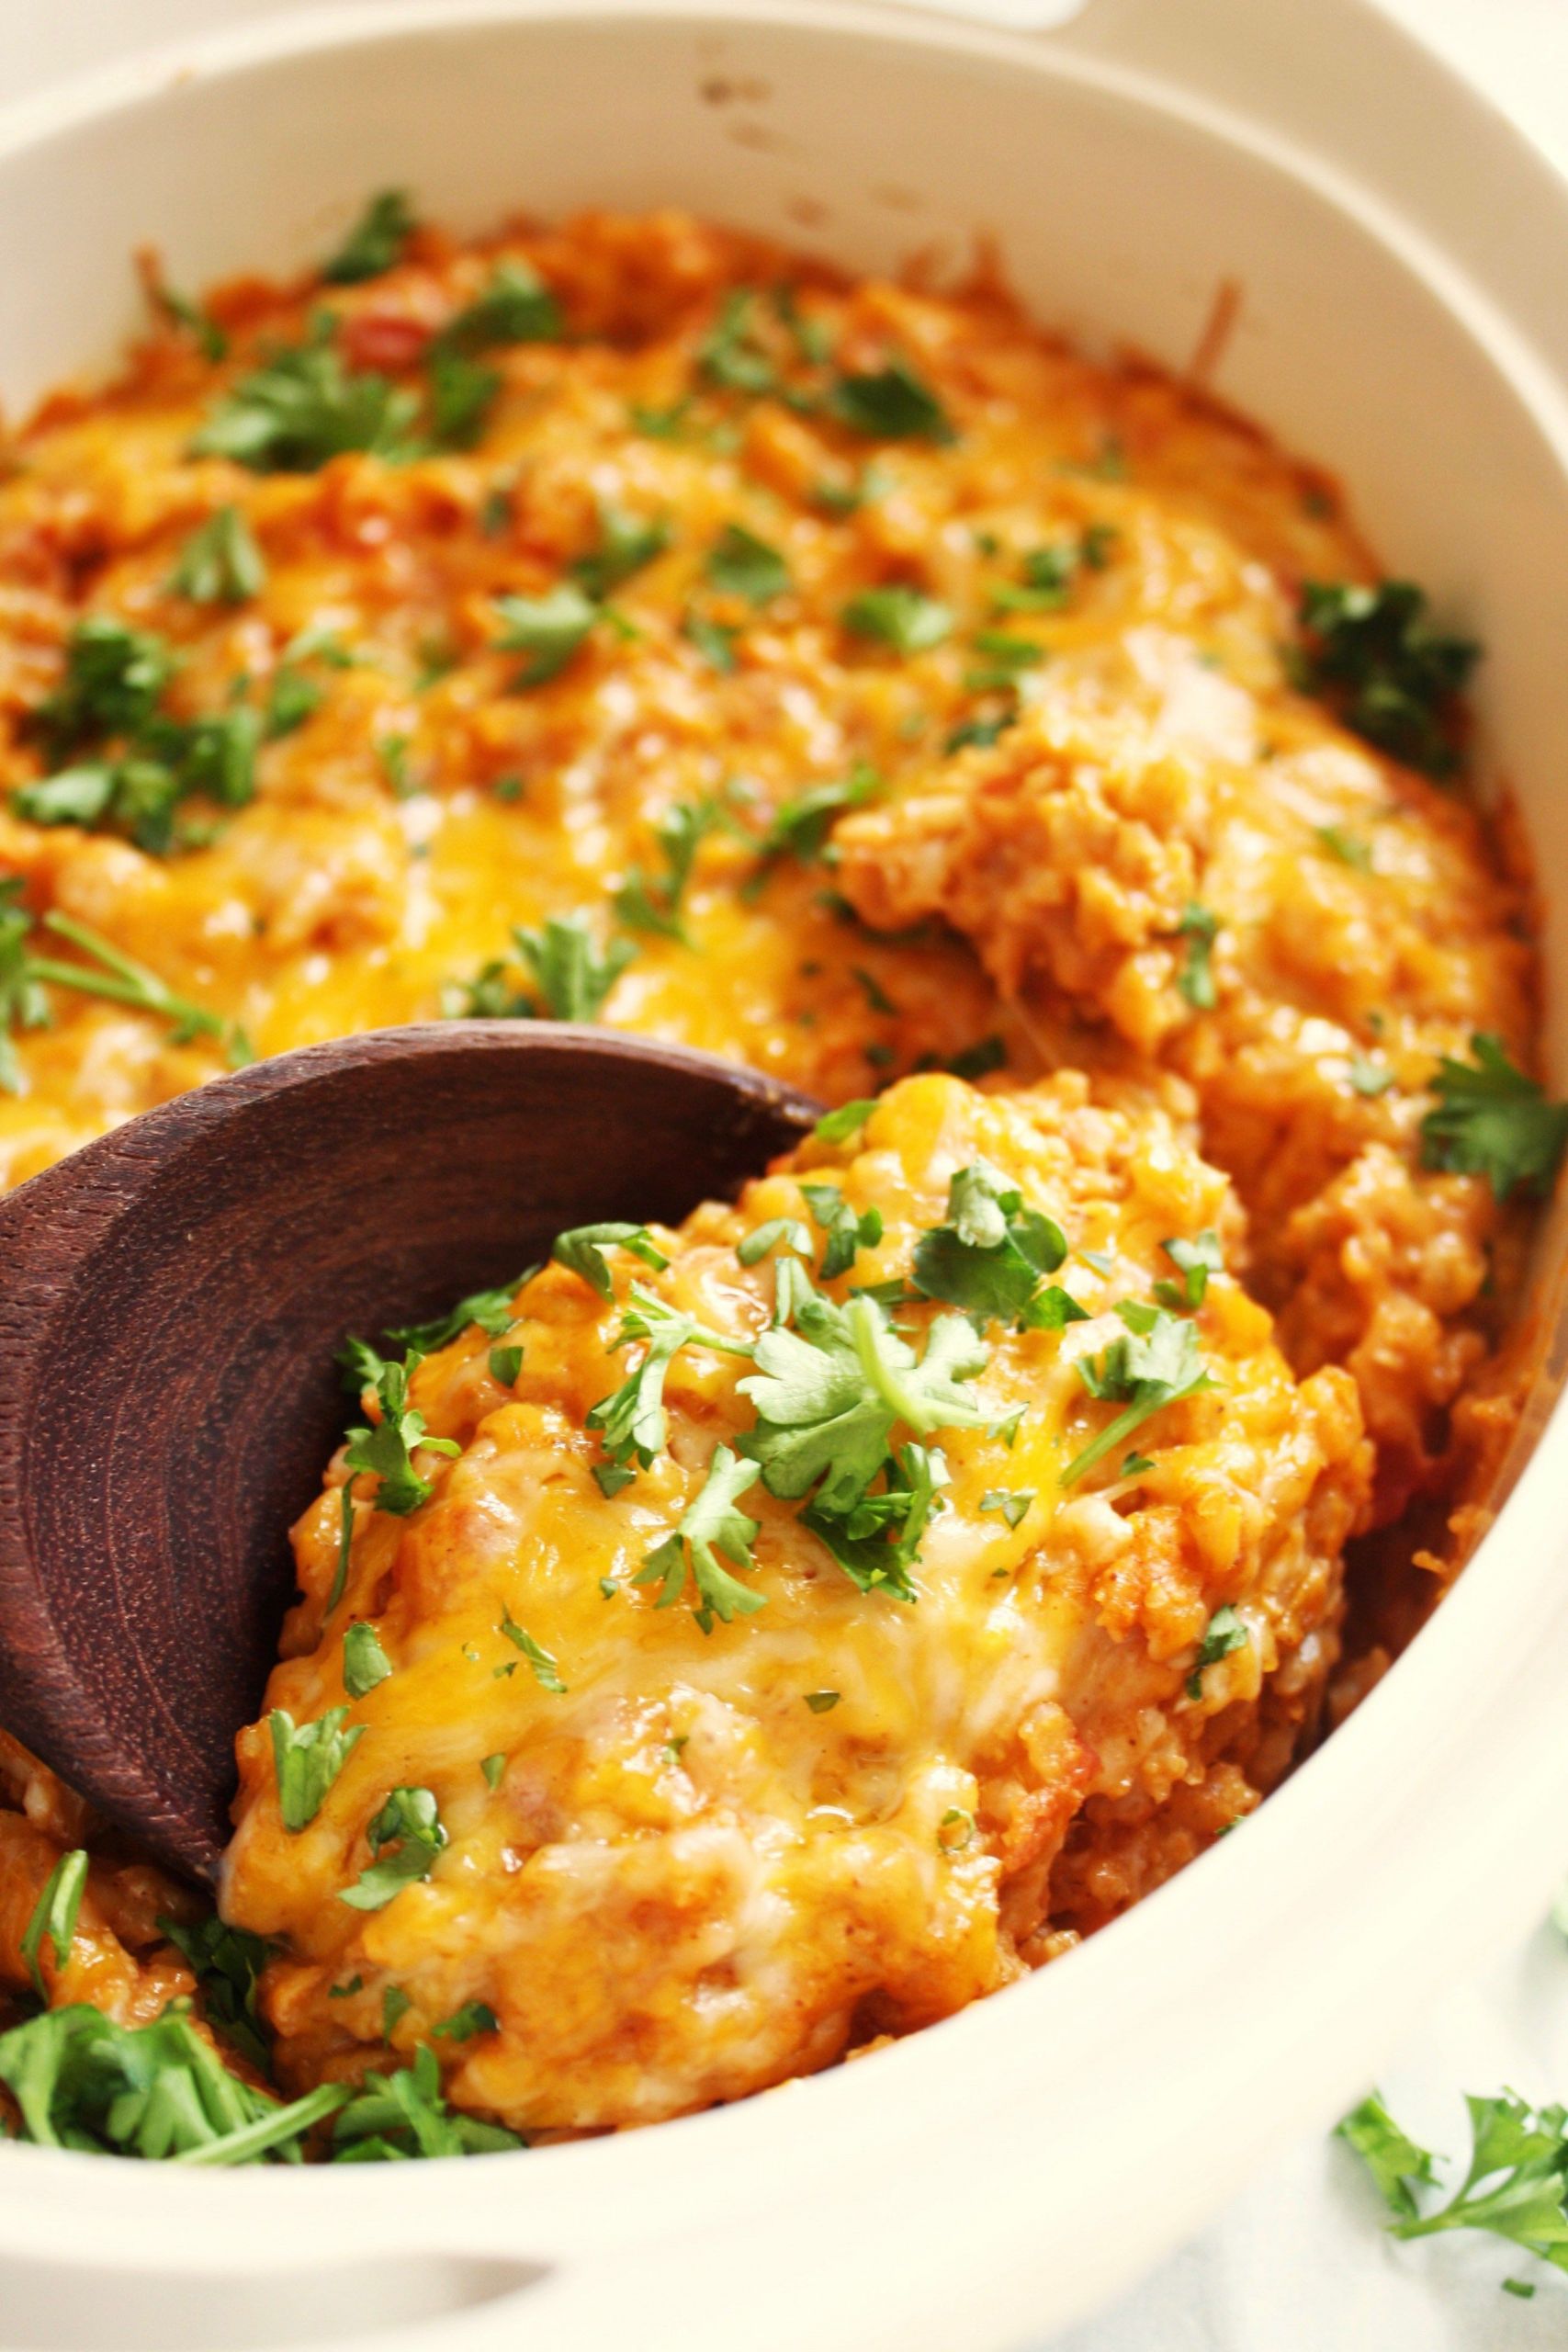 Mexican Main Dishes Recipes
 Cheesy Mexican Rice Casserole Yummy flavorful and